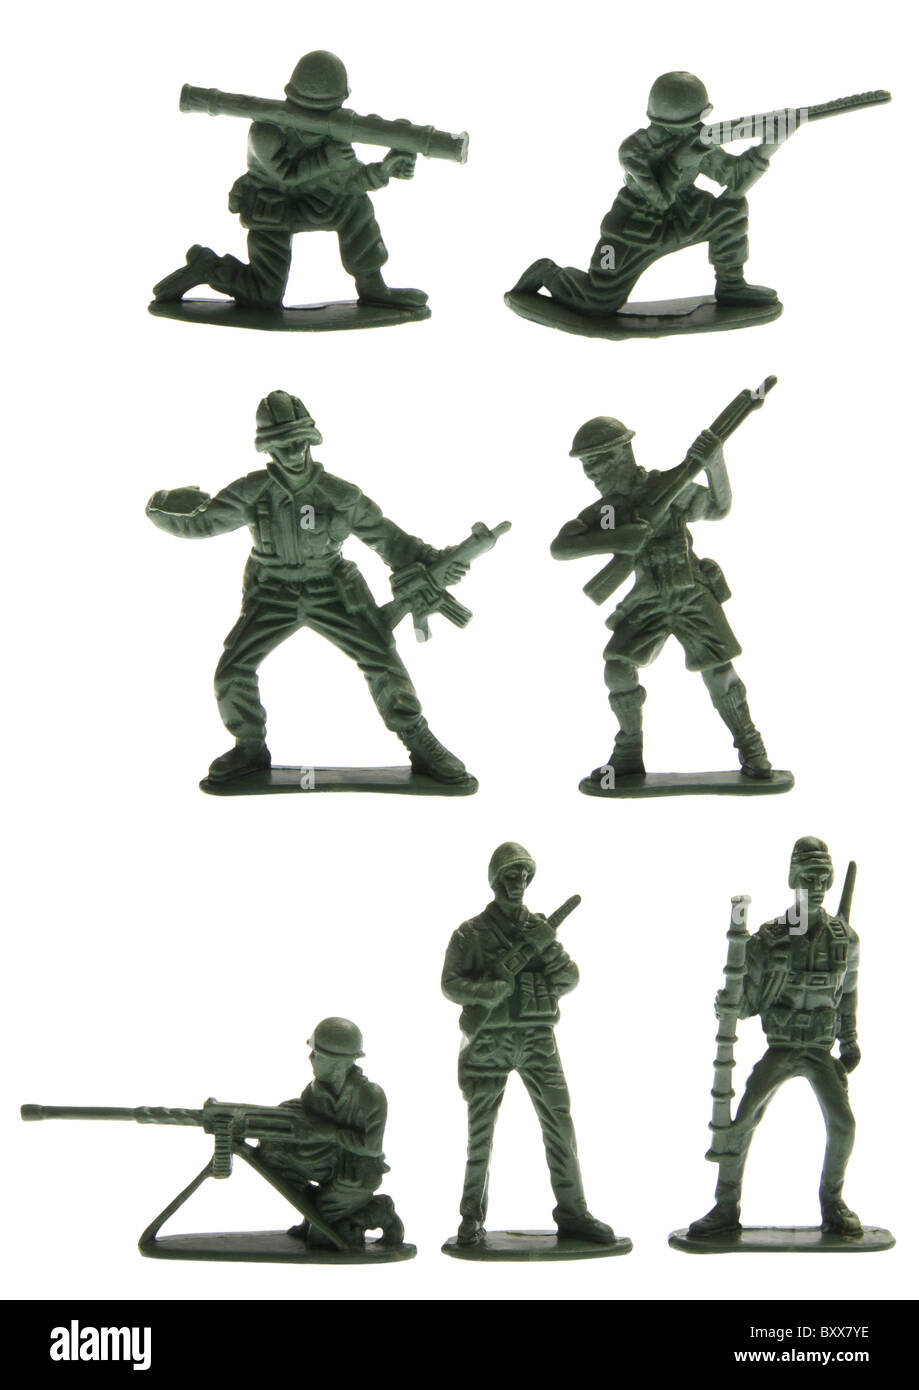 Green plastic toy soldiers on white background Stock Photo